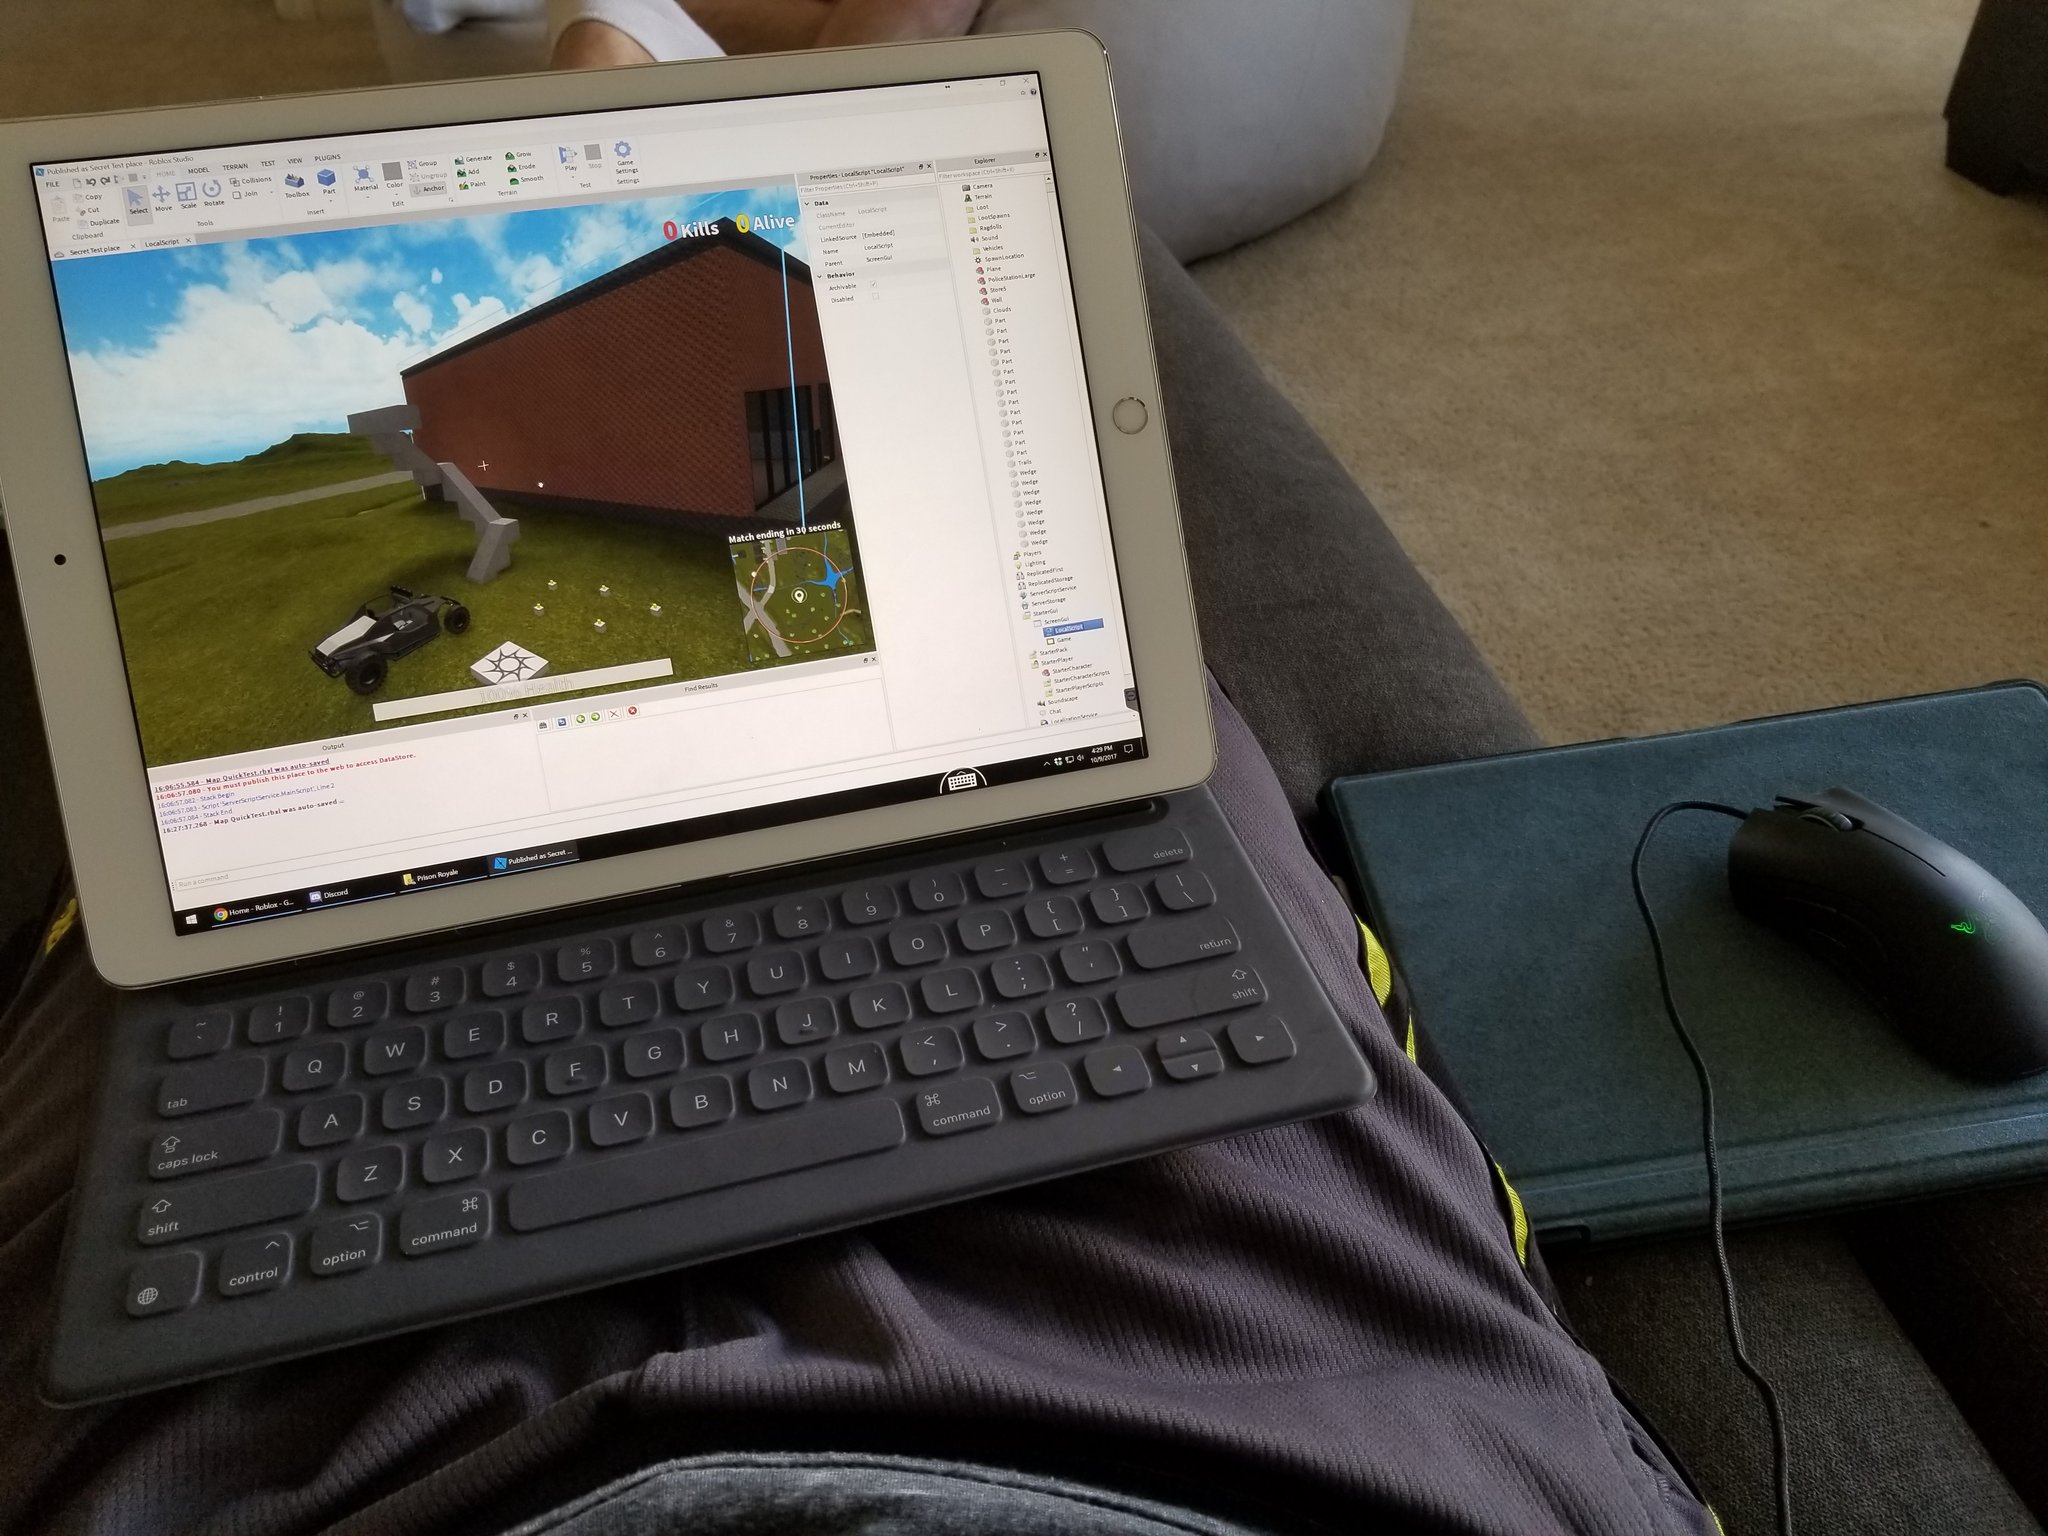 Scriptonroblox On Twitter Pretty Proud Of This I Got Windows 10 Roblox Studio Running On My Ipad As A Wireless Passthrough Robloxdev - scriptonroblox on twitter pretty proud of this i got windows 10 roblox studio running on my ipad as a wireless passthrough robloxdev